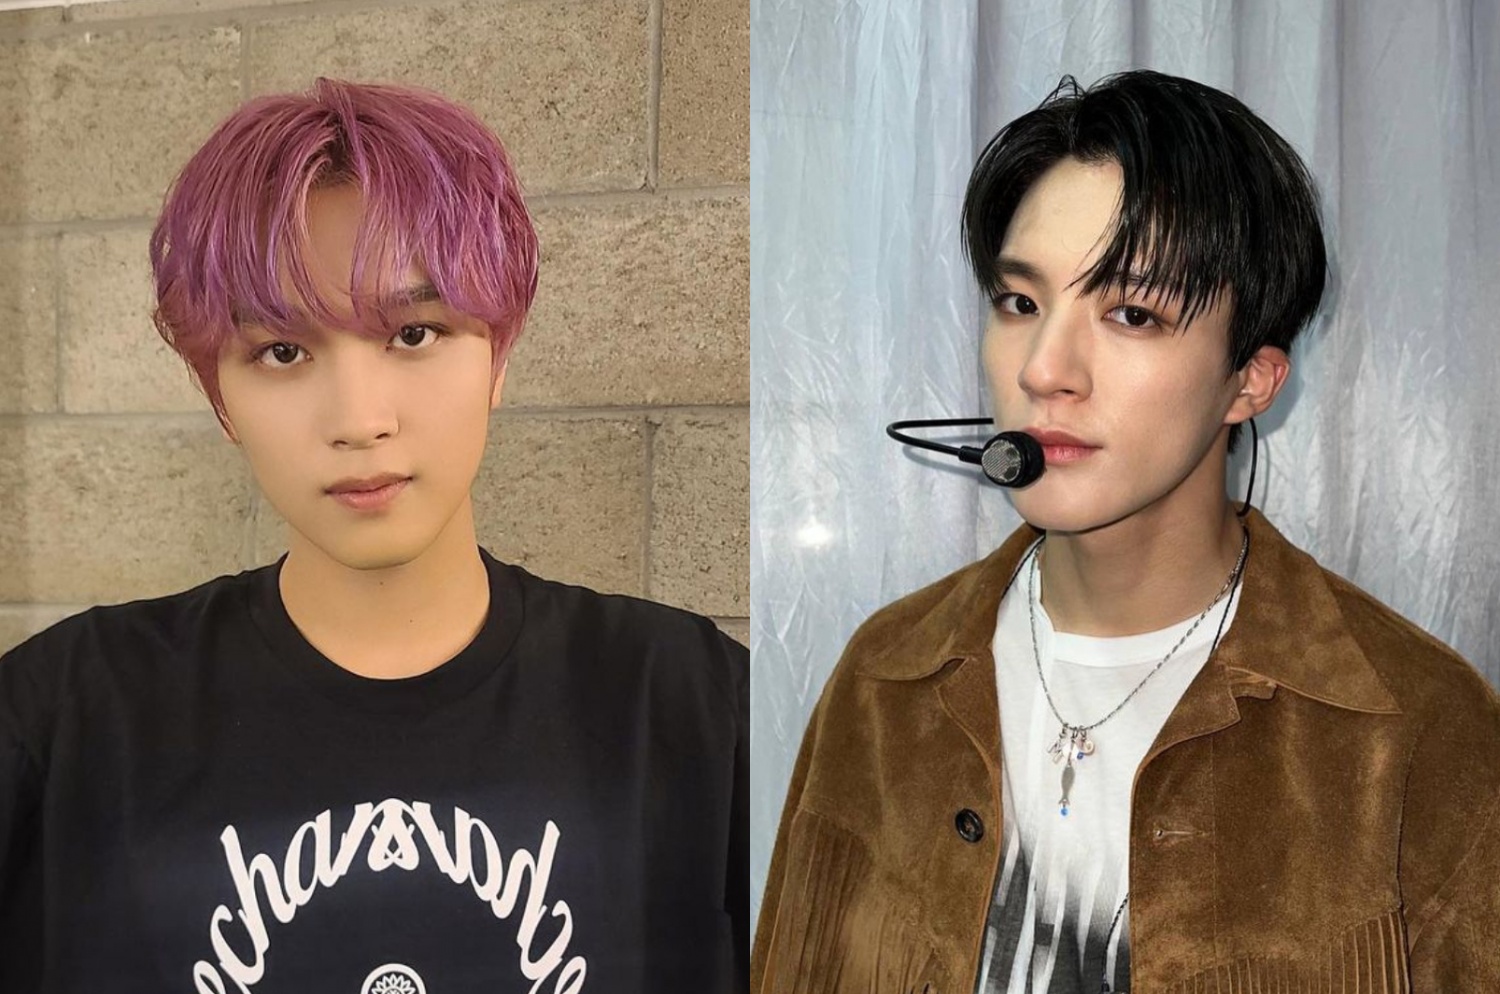 NCT Doyoung reveals that Haechan knew Jeno even before they joined SM